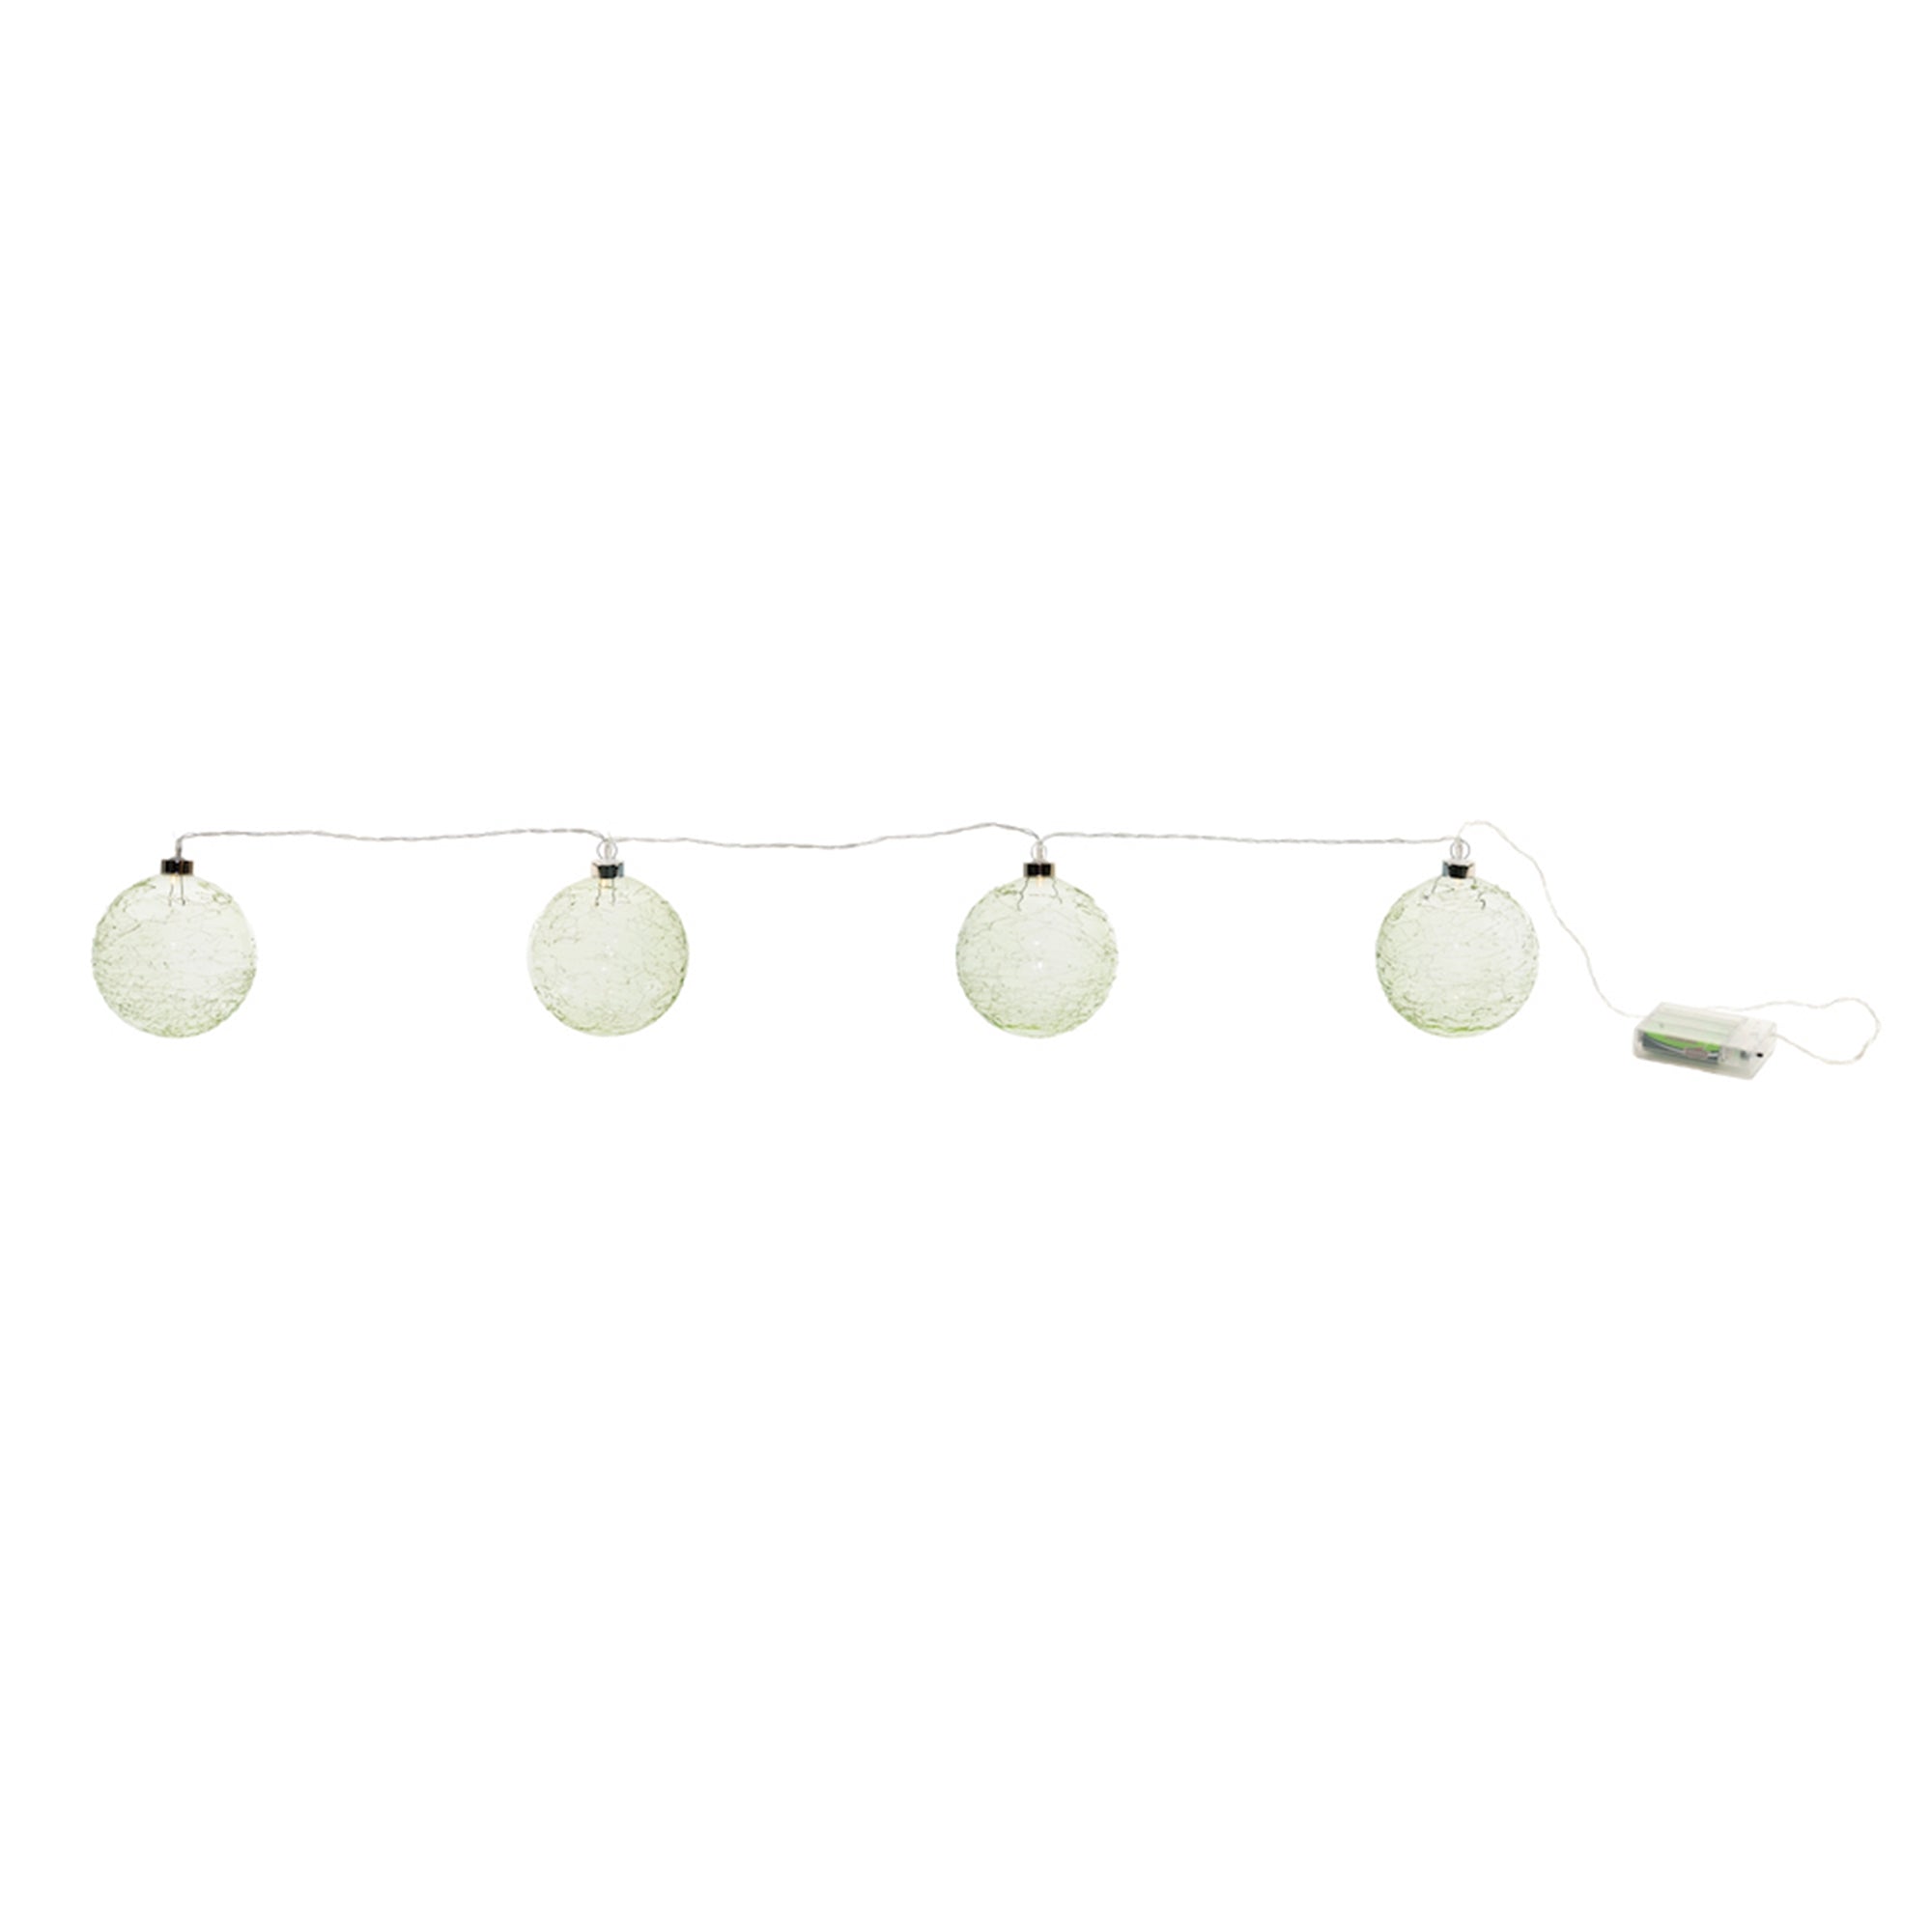 LED Green Crackle Glass Ball Ornament String (Set of 4)